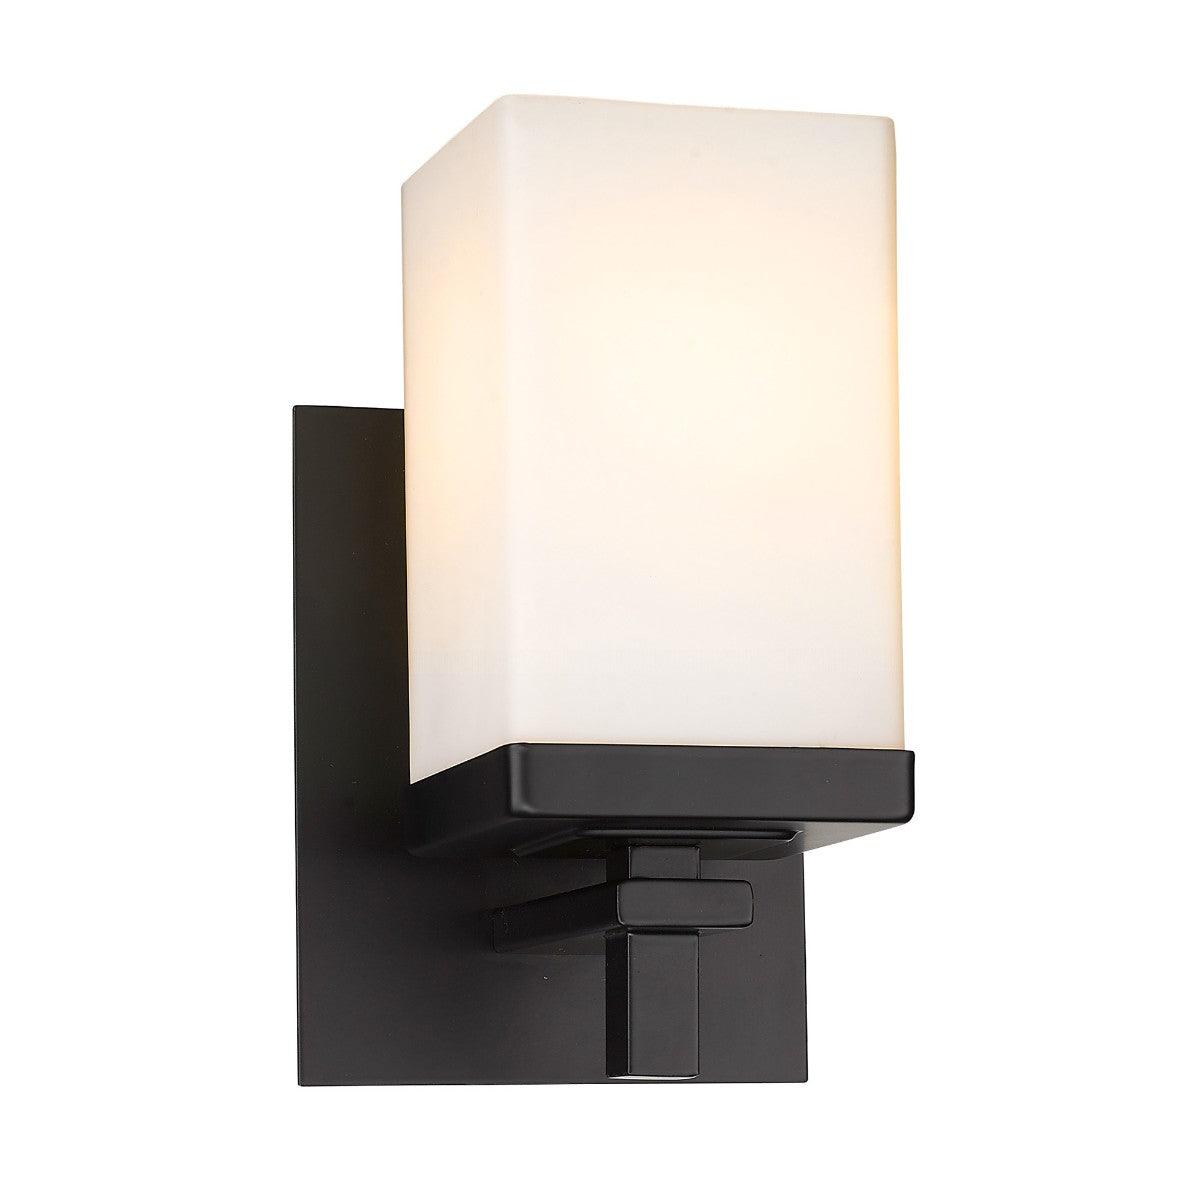 Maddox 8 in. Armed Sconce